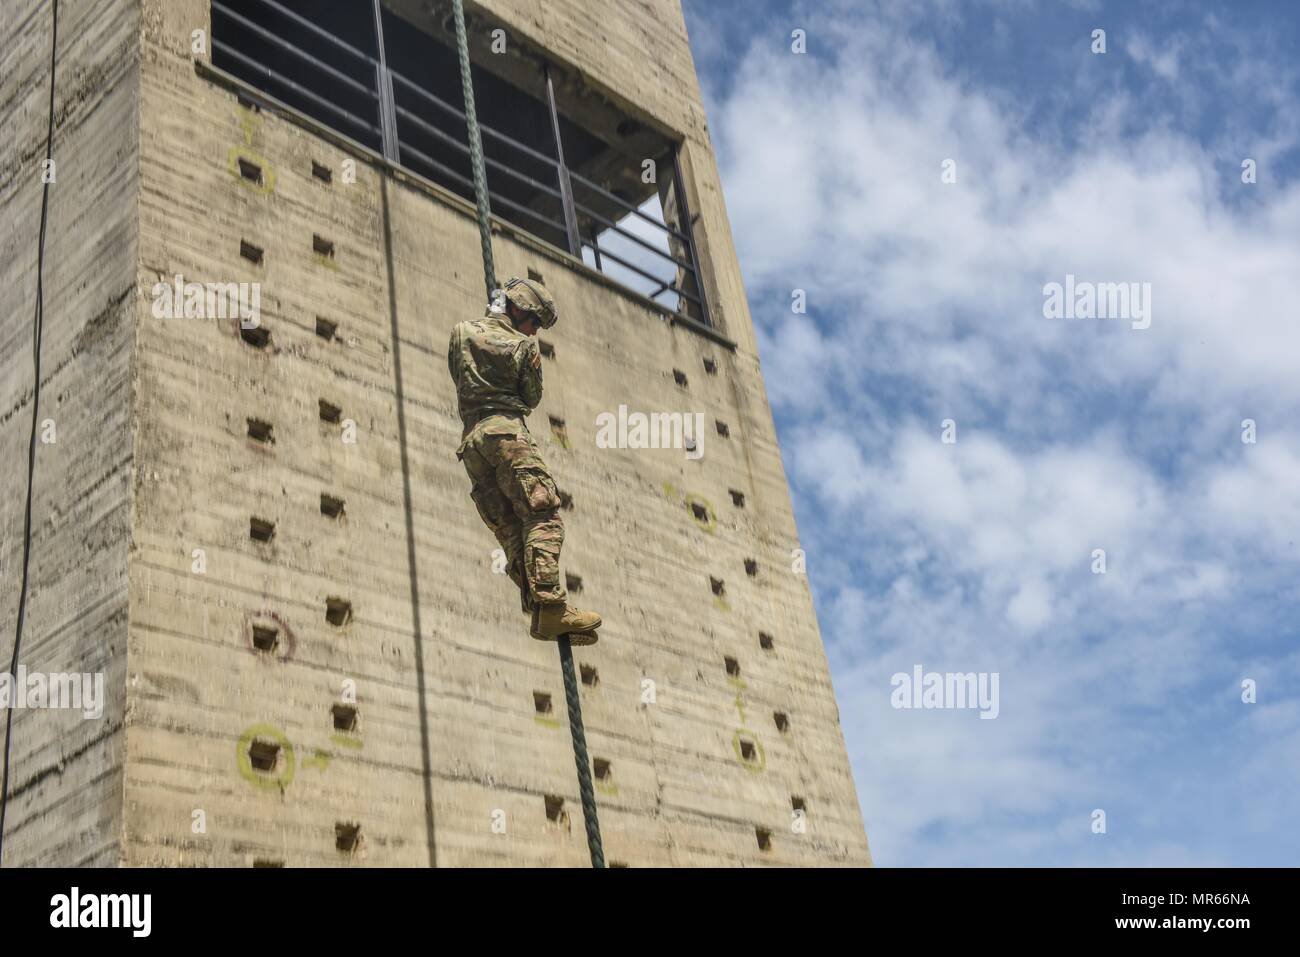 Greek paratroopers with 1st Paratrooper Commando Brigade, Greek Army conduct rappelling and fast rope training for Sky Soldiers from B Company, 1st Battalion, 503rd Infantry Regiment, 173rd Airborne Brigade, May 19, 2017 in Camp Rentina, Greece as a part of Exercise Bayonet Minotaur 2017. Bayonet-Minotaur is a bilateral training exercise between U.S. Soldiers assigned to 173rd Airborne Brigade and the Greek Armed Forces, focused on enhancing NATO operational standards and developing individual technical skills. Stock Photo